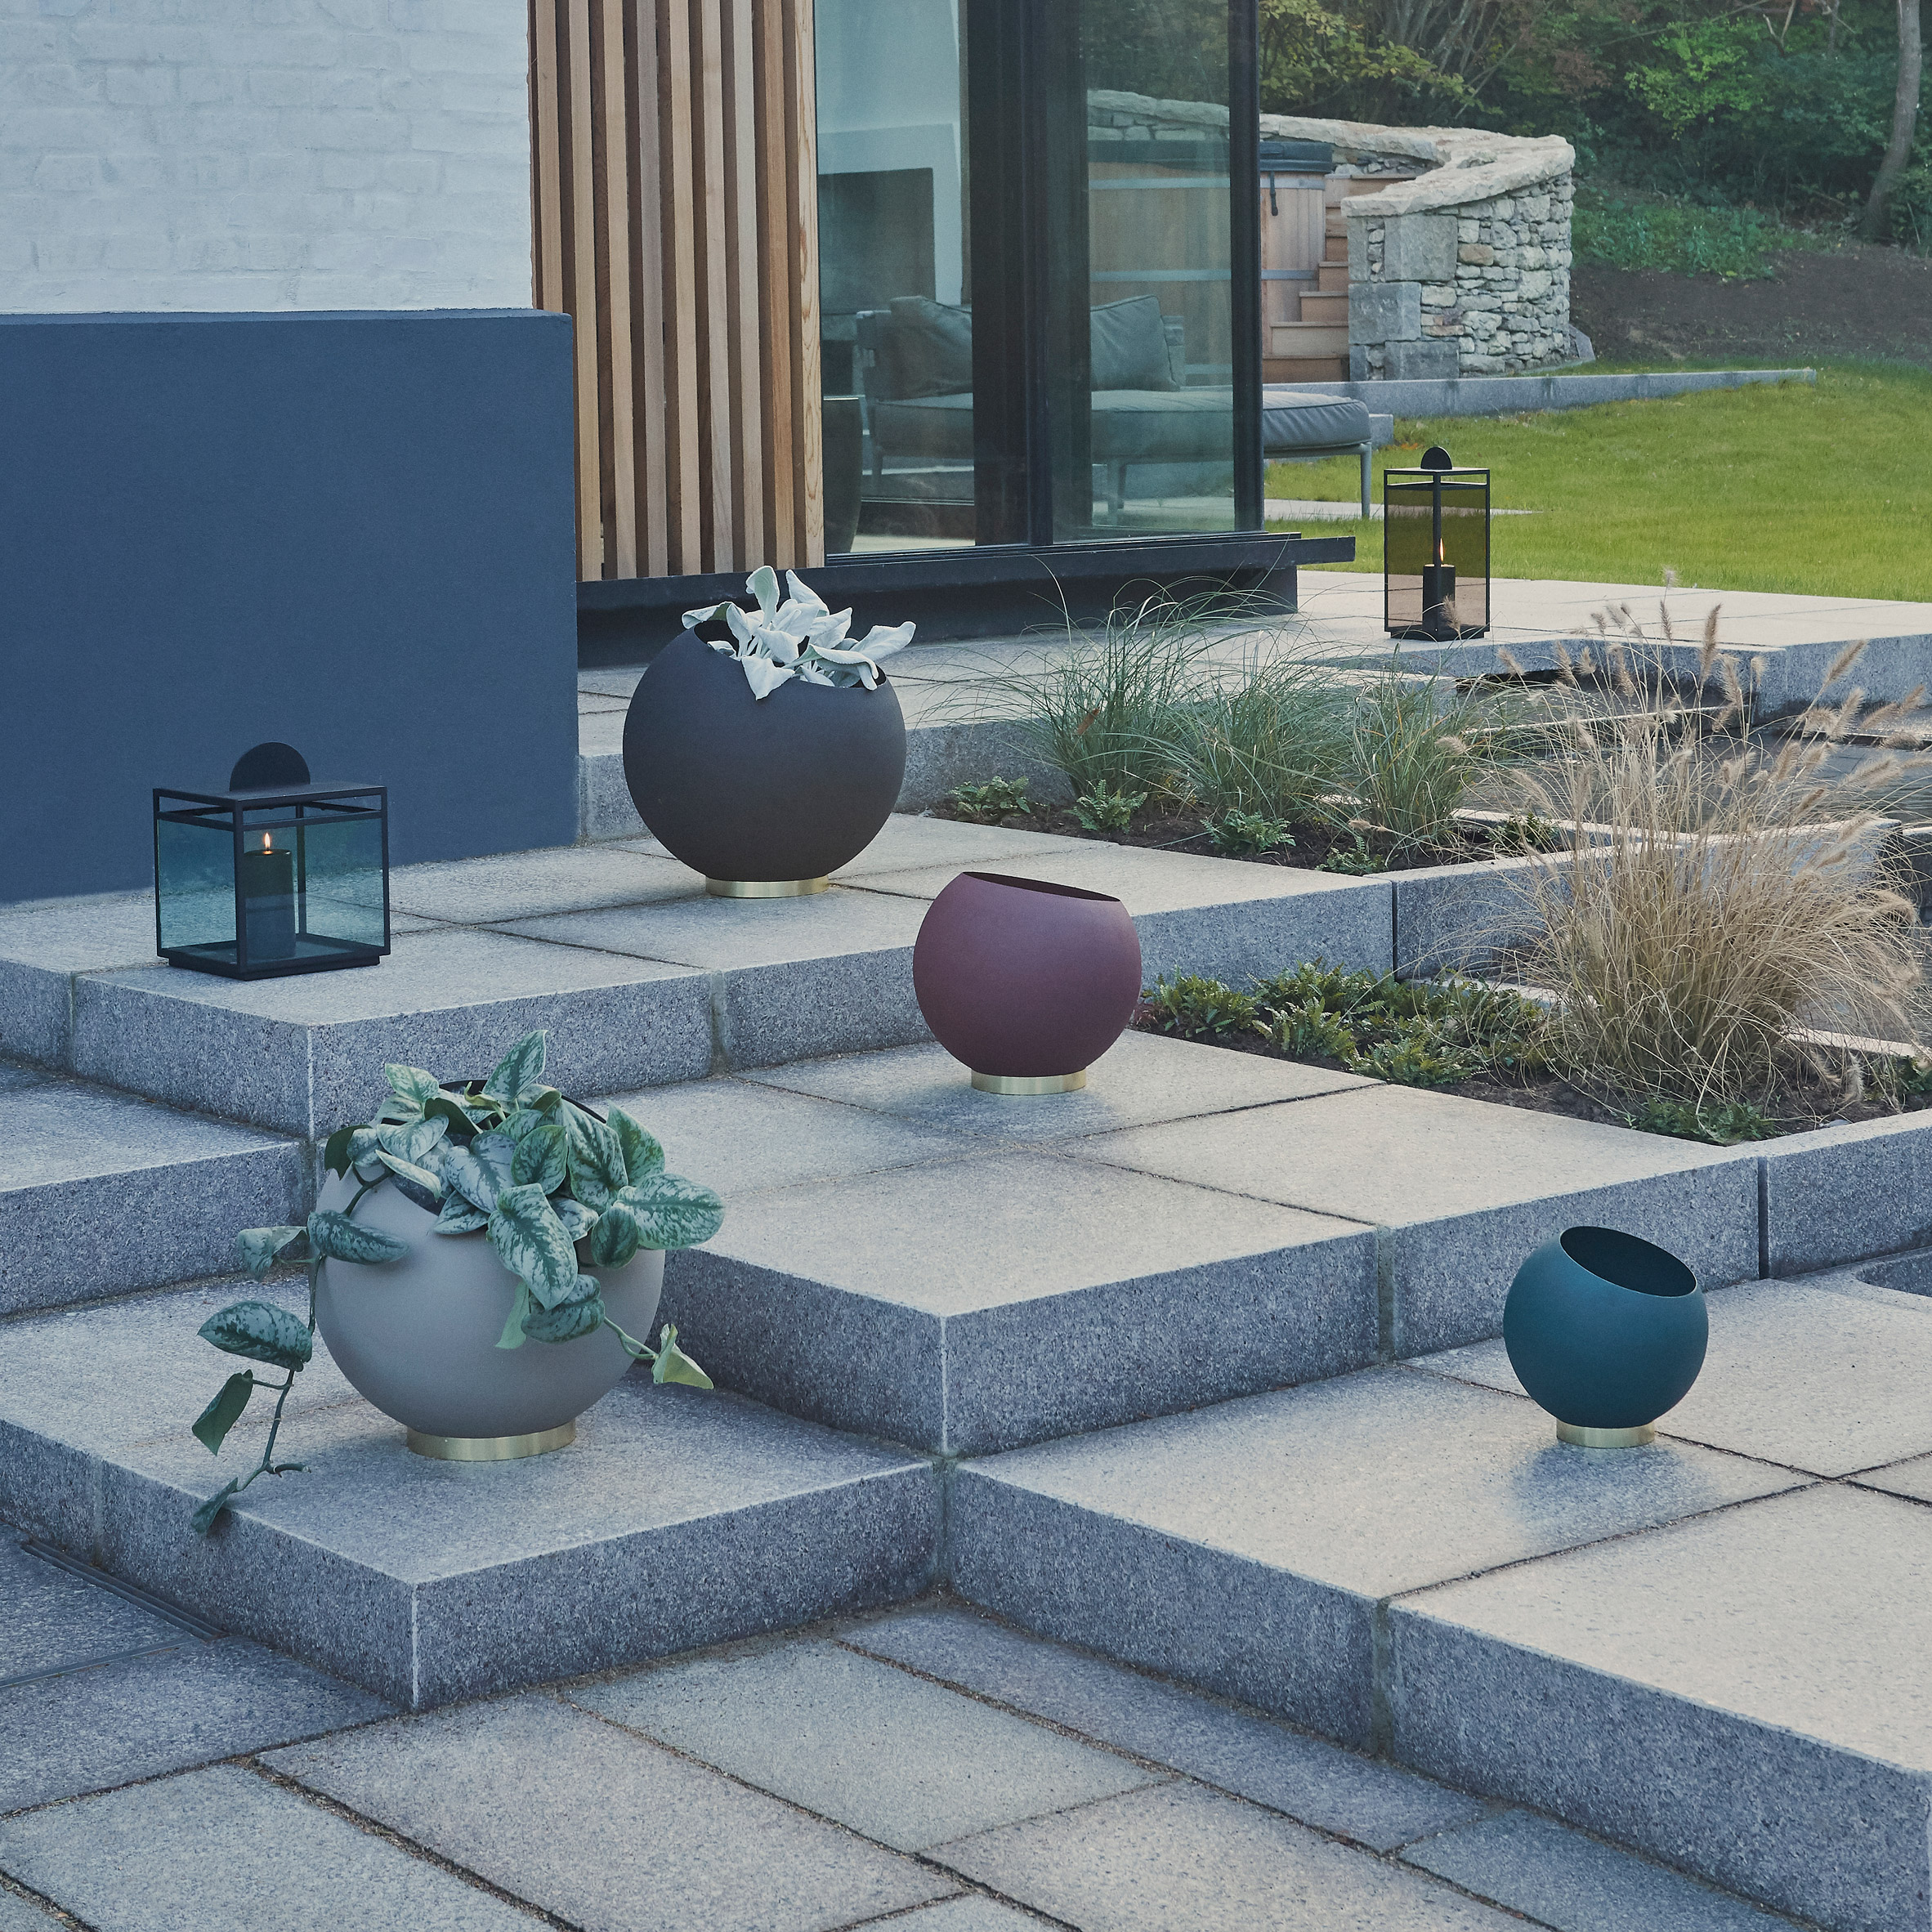 Outdoor furniture: Globe Planters by AYTM